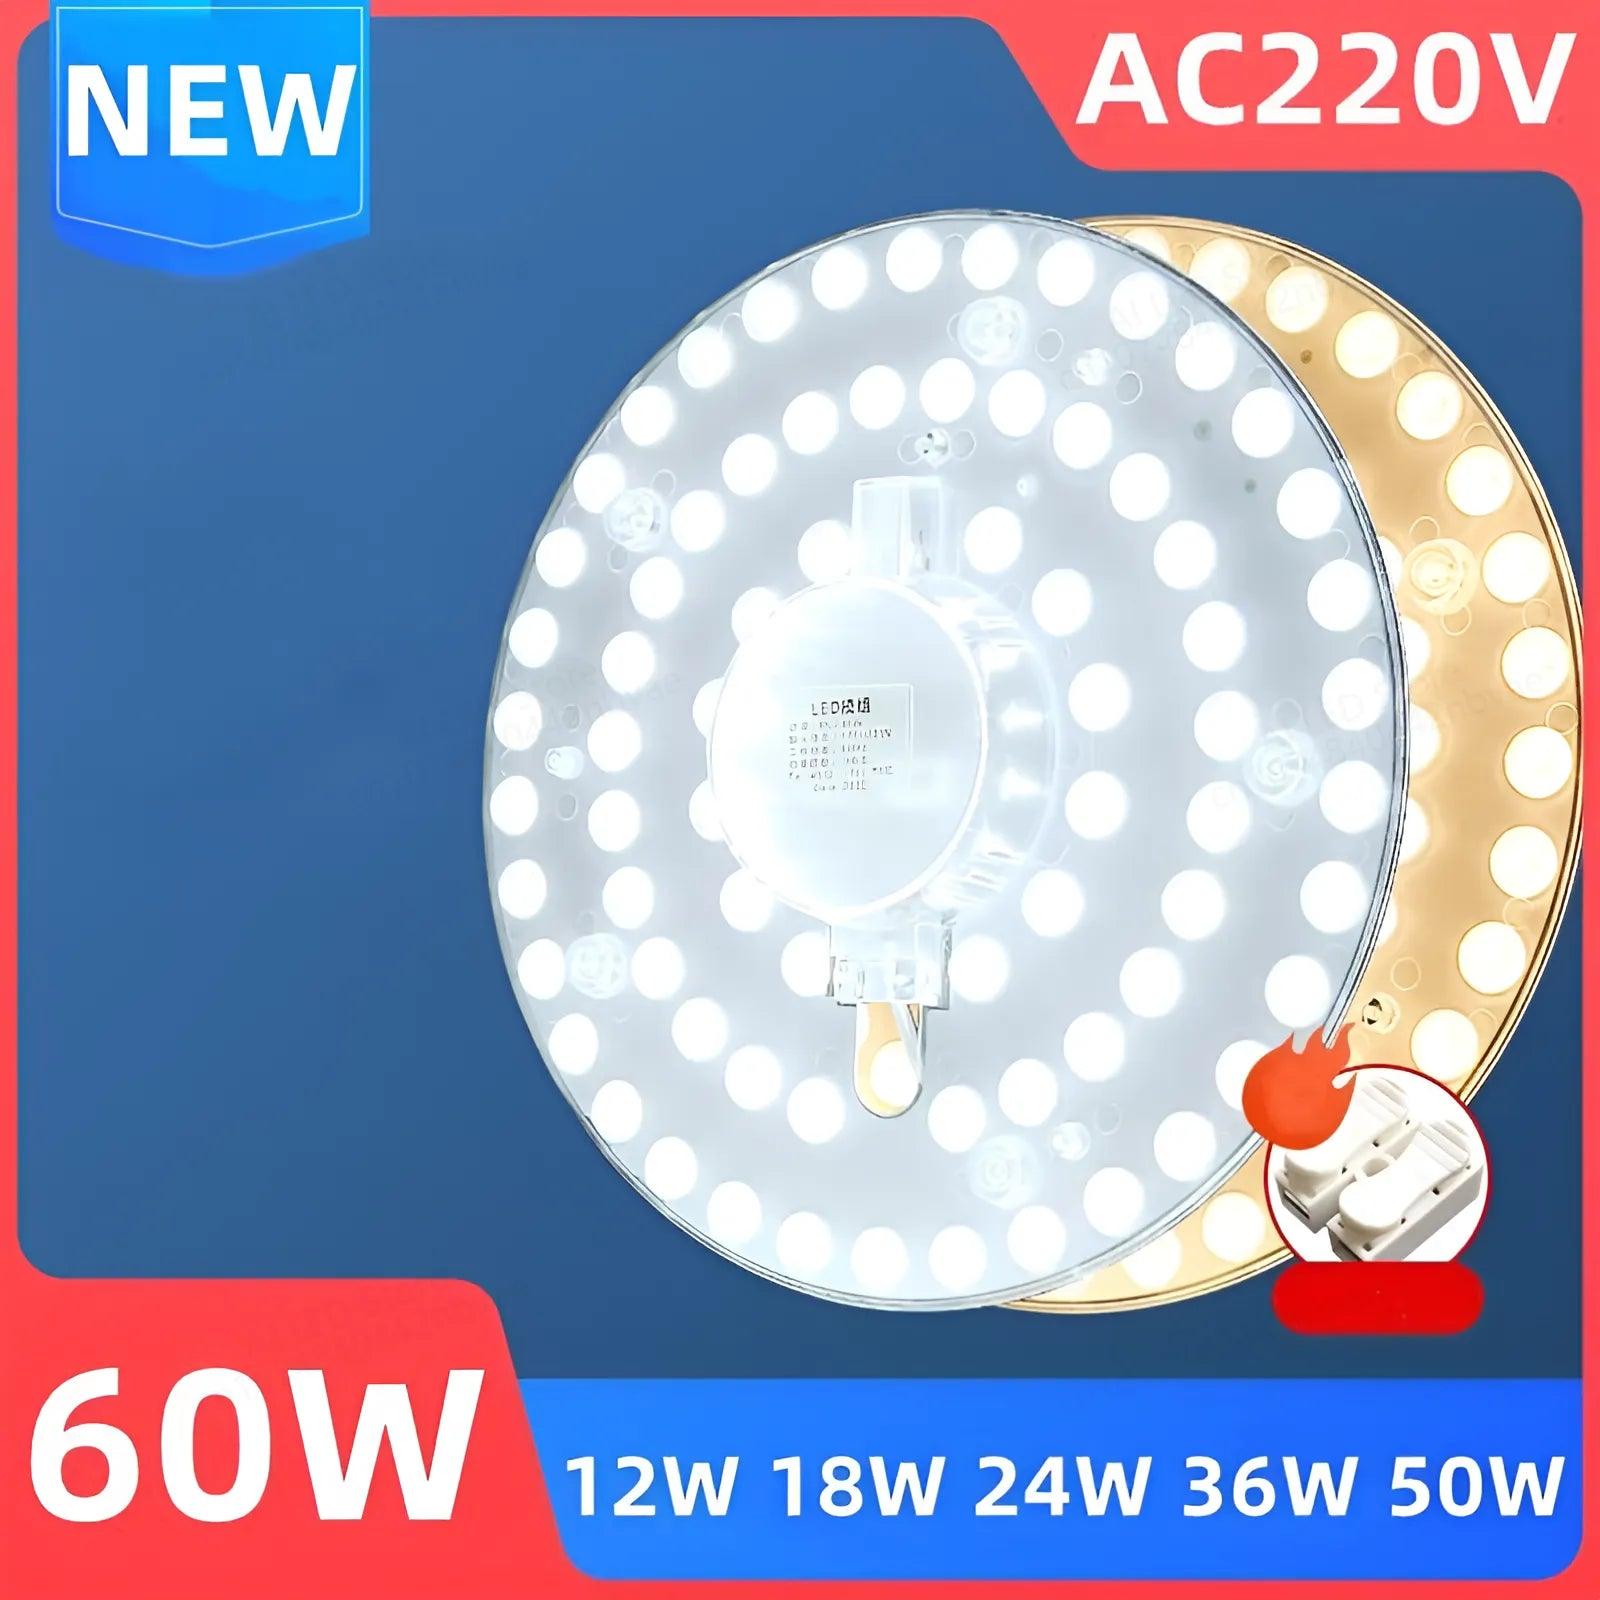 LED Round Panel Ceiling Light Fixture - Energy Efficient 60W-12W Circular Lamp Board with 360° Beam Angle  ourlum.com   